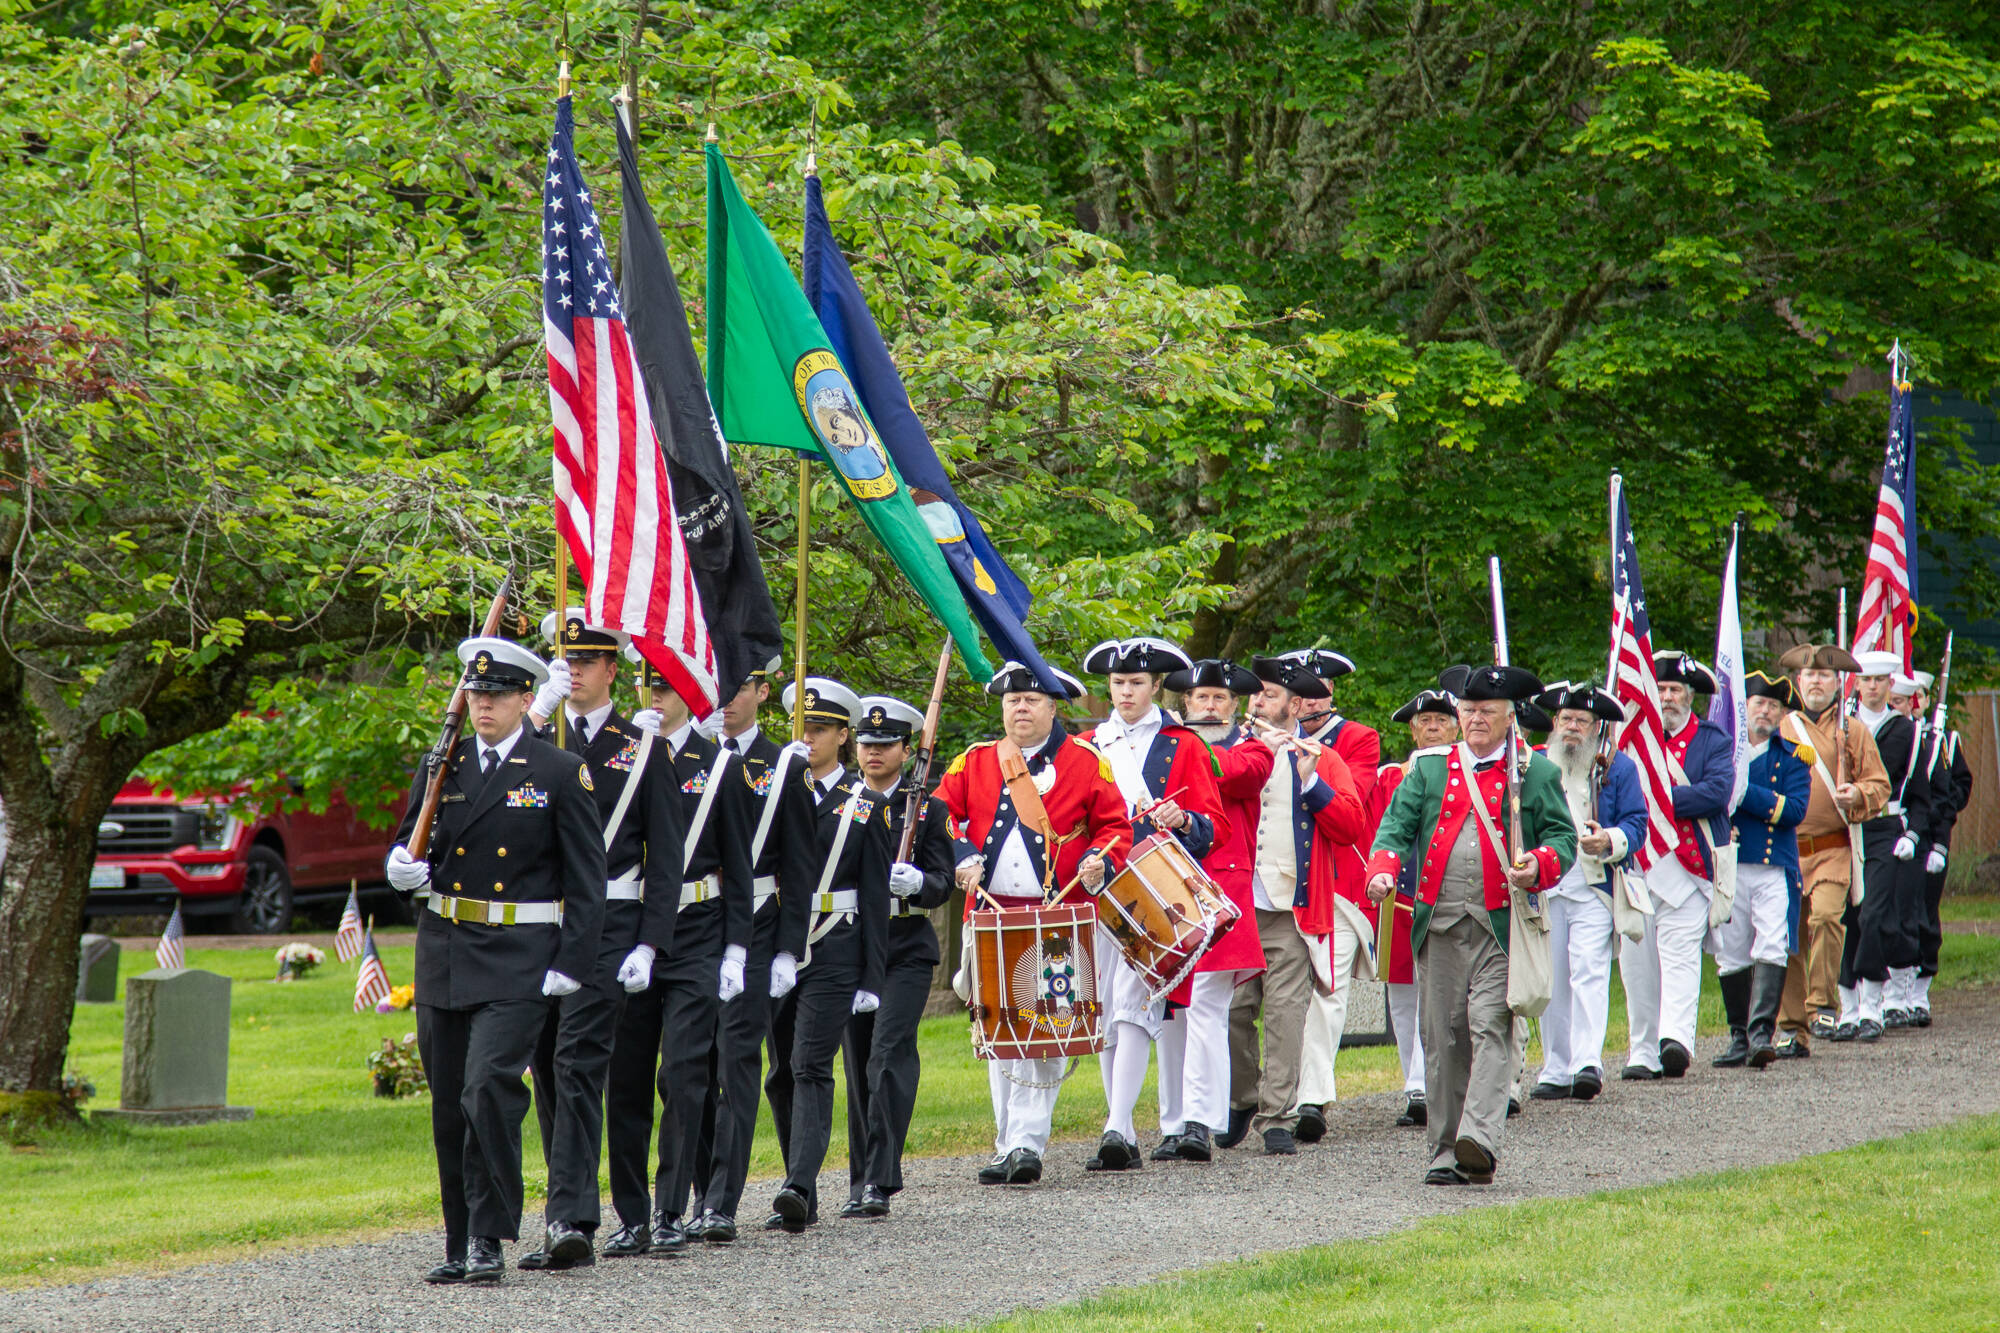 Chief Petty Officer William Thiel, U.S. Navy (Ret); Oak Harbor High School NJROTC Color Guard; Sons of the American Revolution, George Washington Chapter; and the Sea Cadets Corps, Orion Squadron joined the Memorial Day Service of Remembrance at the Maple Leaf Cemetery. (Photo by Caitlyn Anderson)